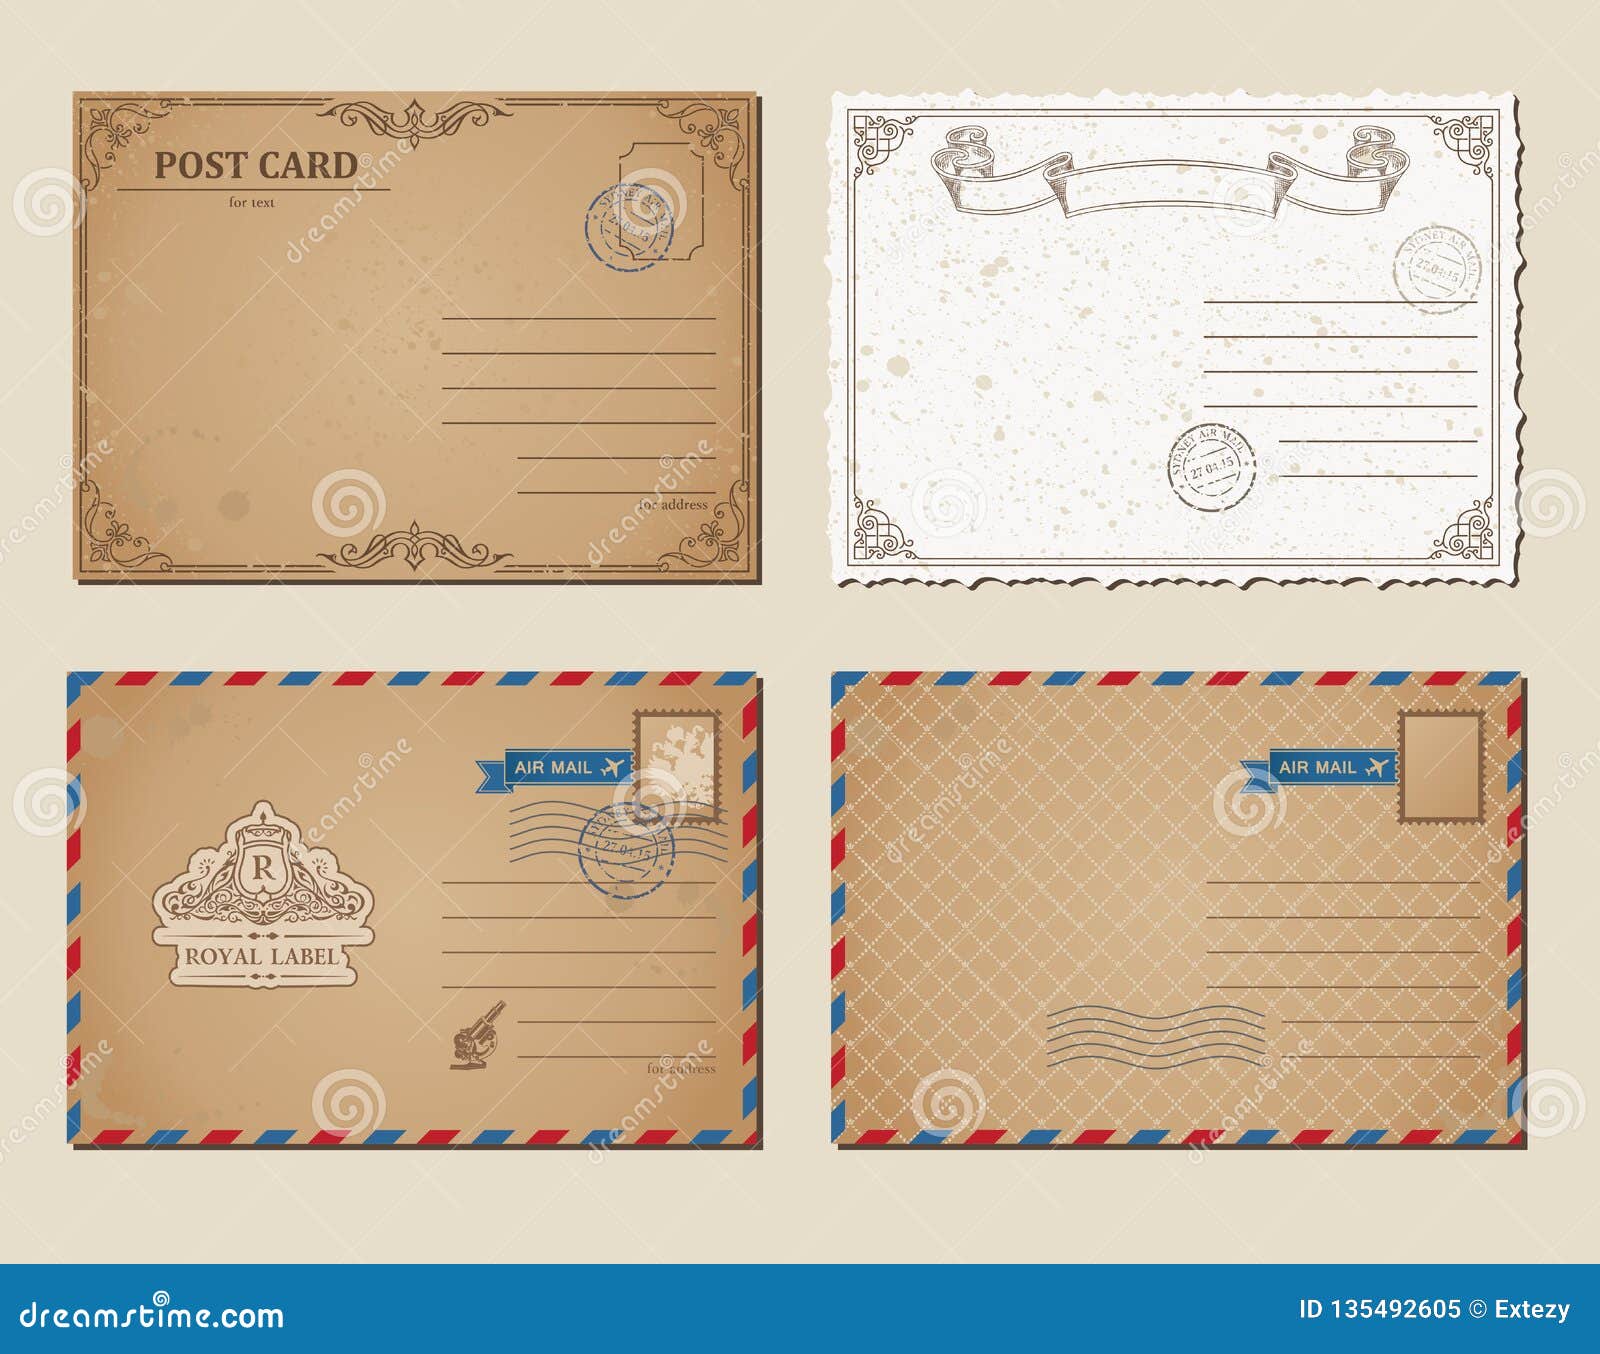 Vintage Postcards, Postage Stamps, Vector Illustration Post Cards With Post Cards Template